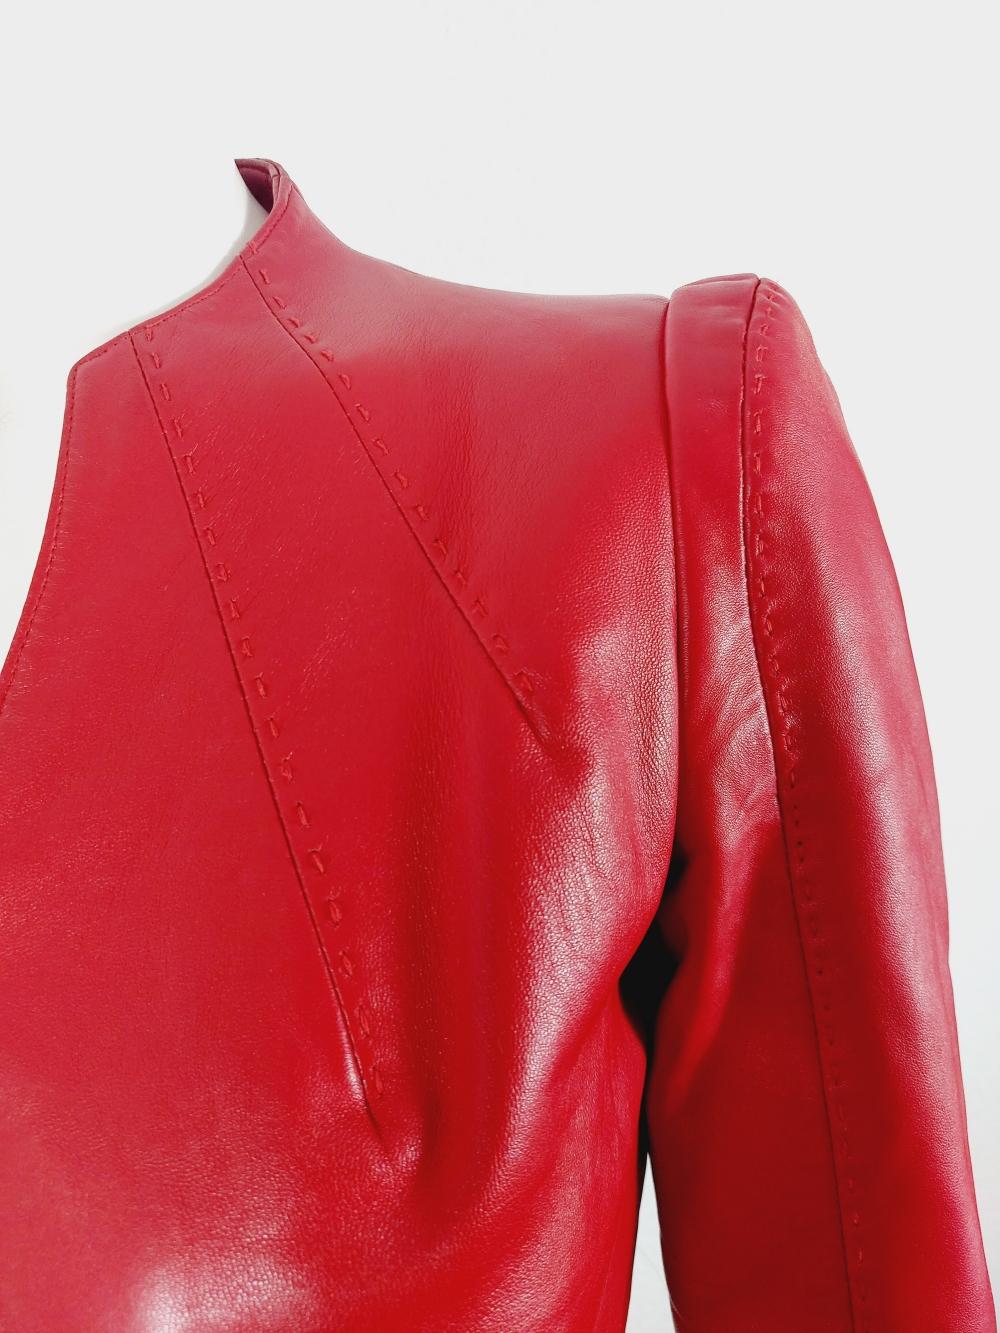 Thierry Mugler Couture Red Leather Lamb Runway Wasp Waist Motorcycle 90s Jacket 1